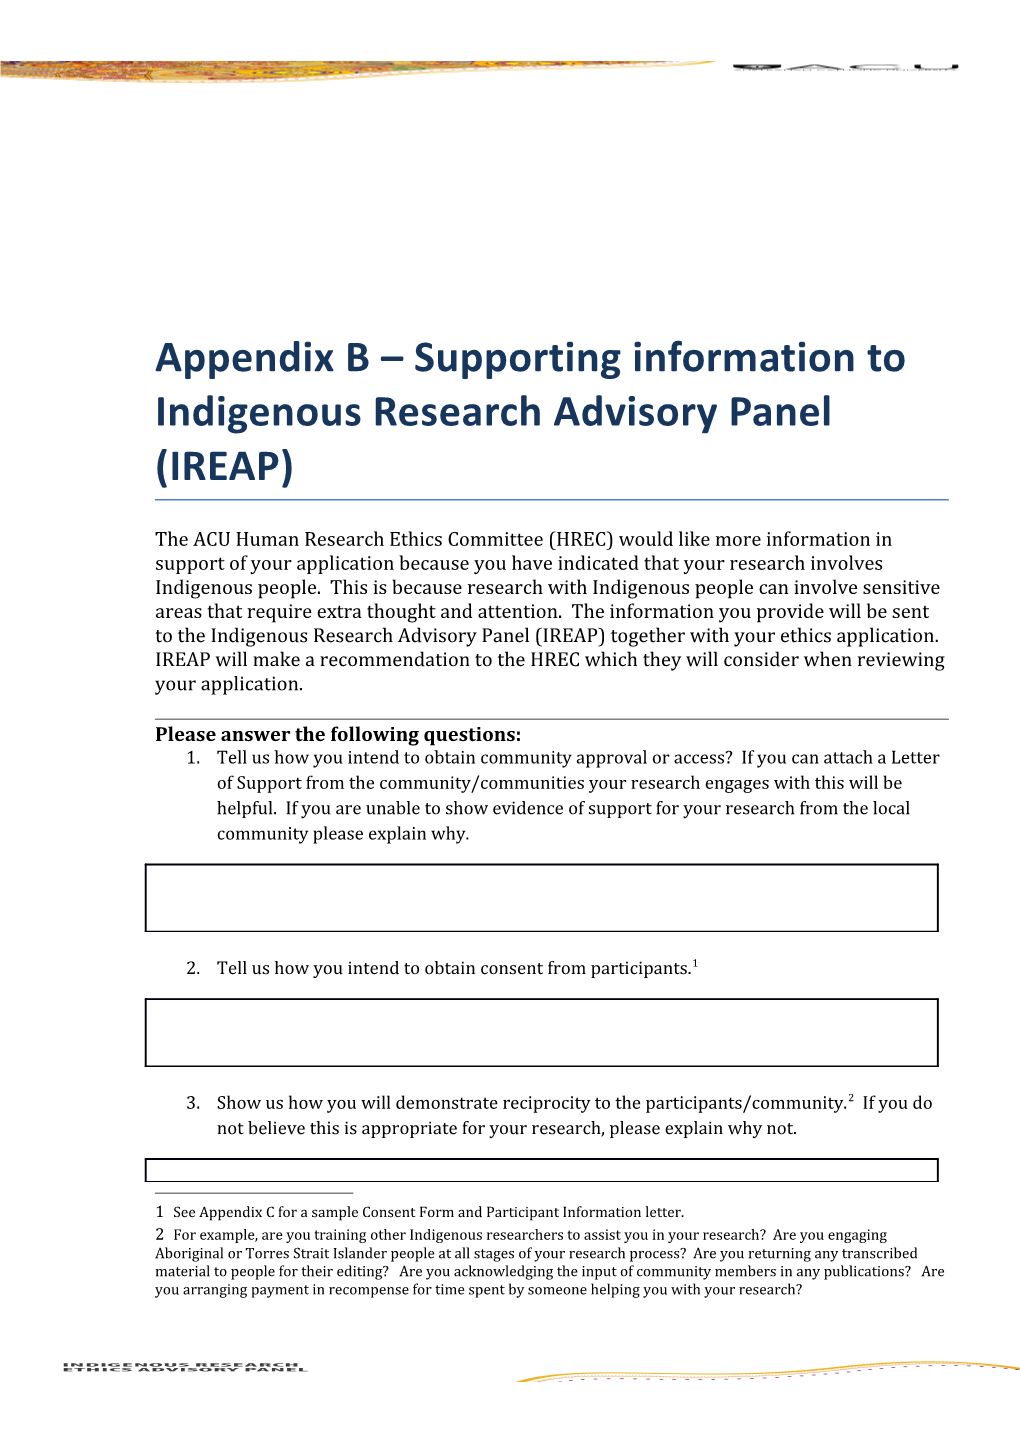 Appendix B Supporting Information to Indigenous Research Advisory Panel (IREAP)